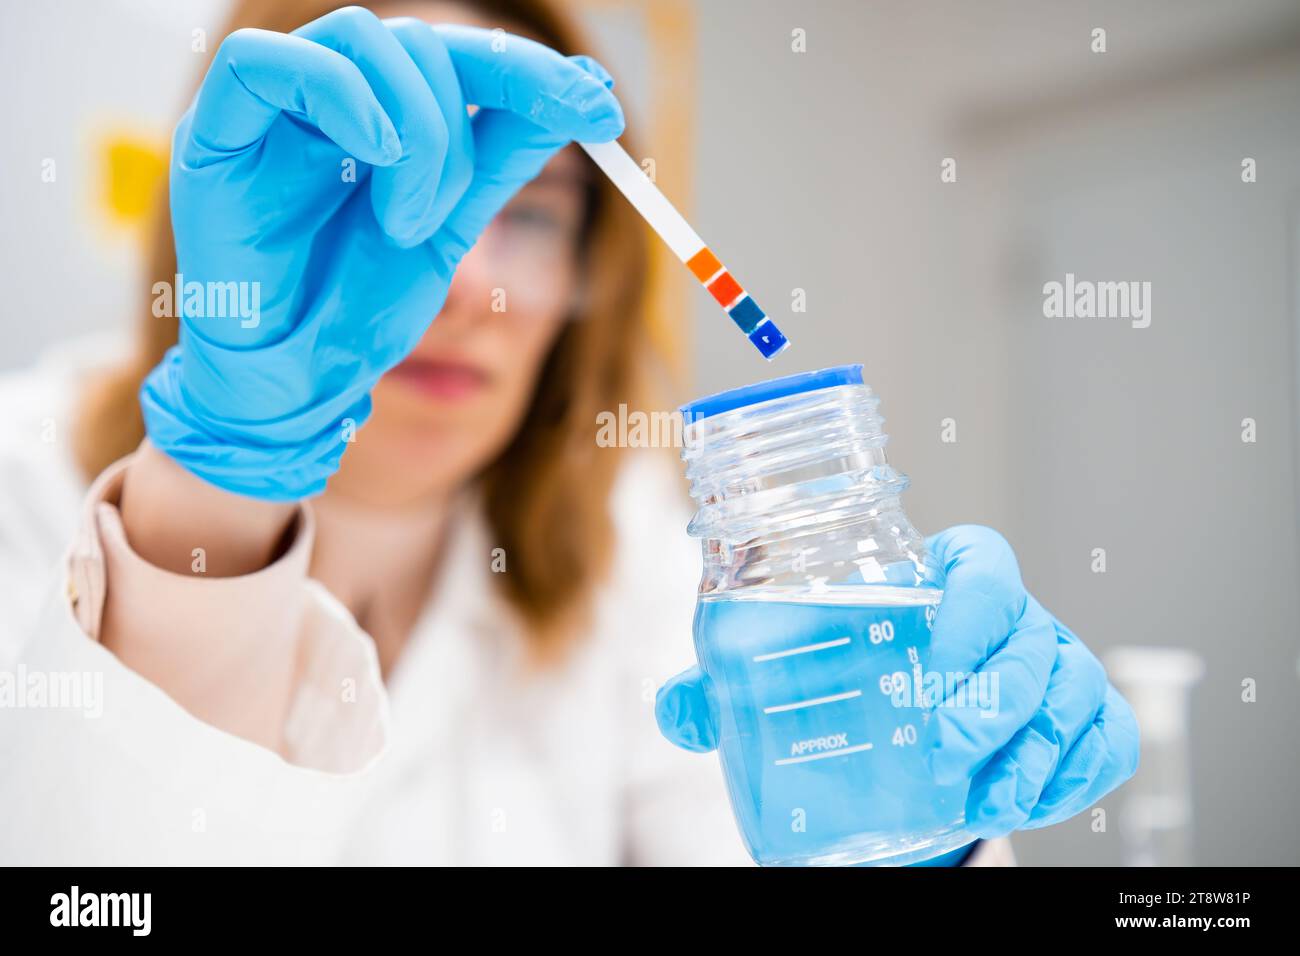 Female scientist measures pH of the solution using indicator paper Stock Photo